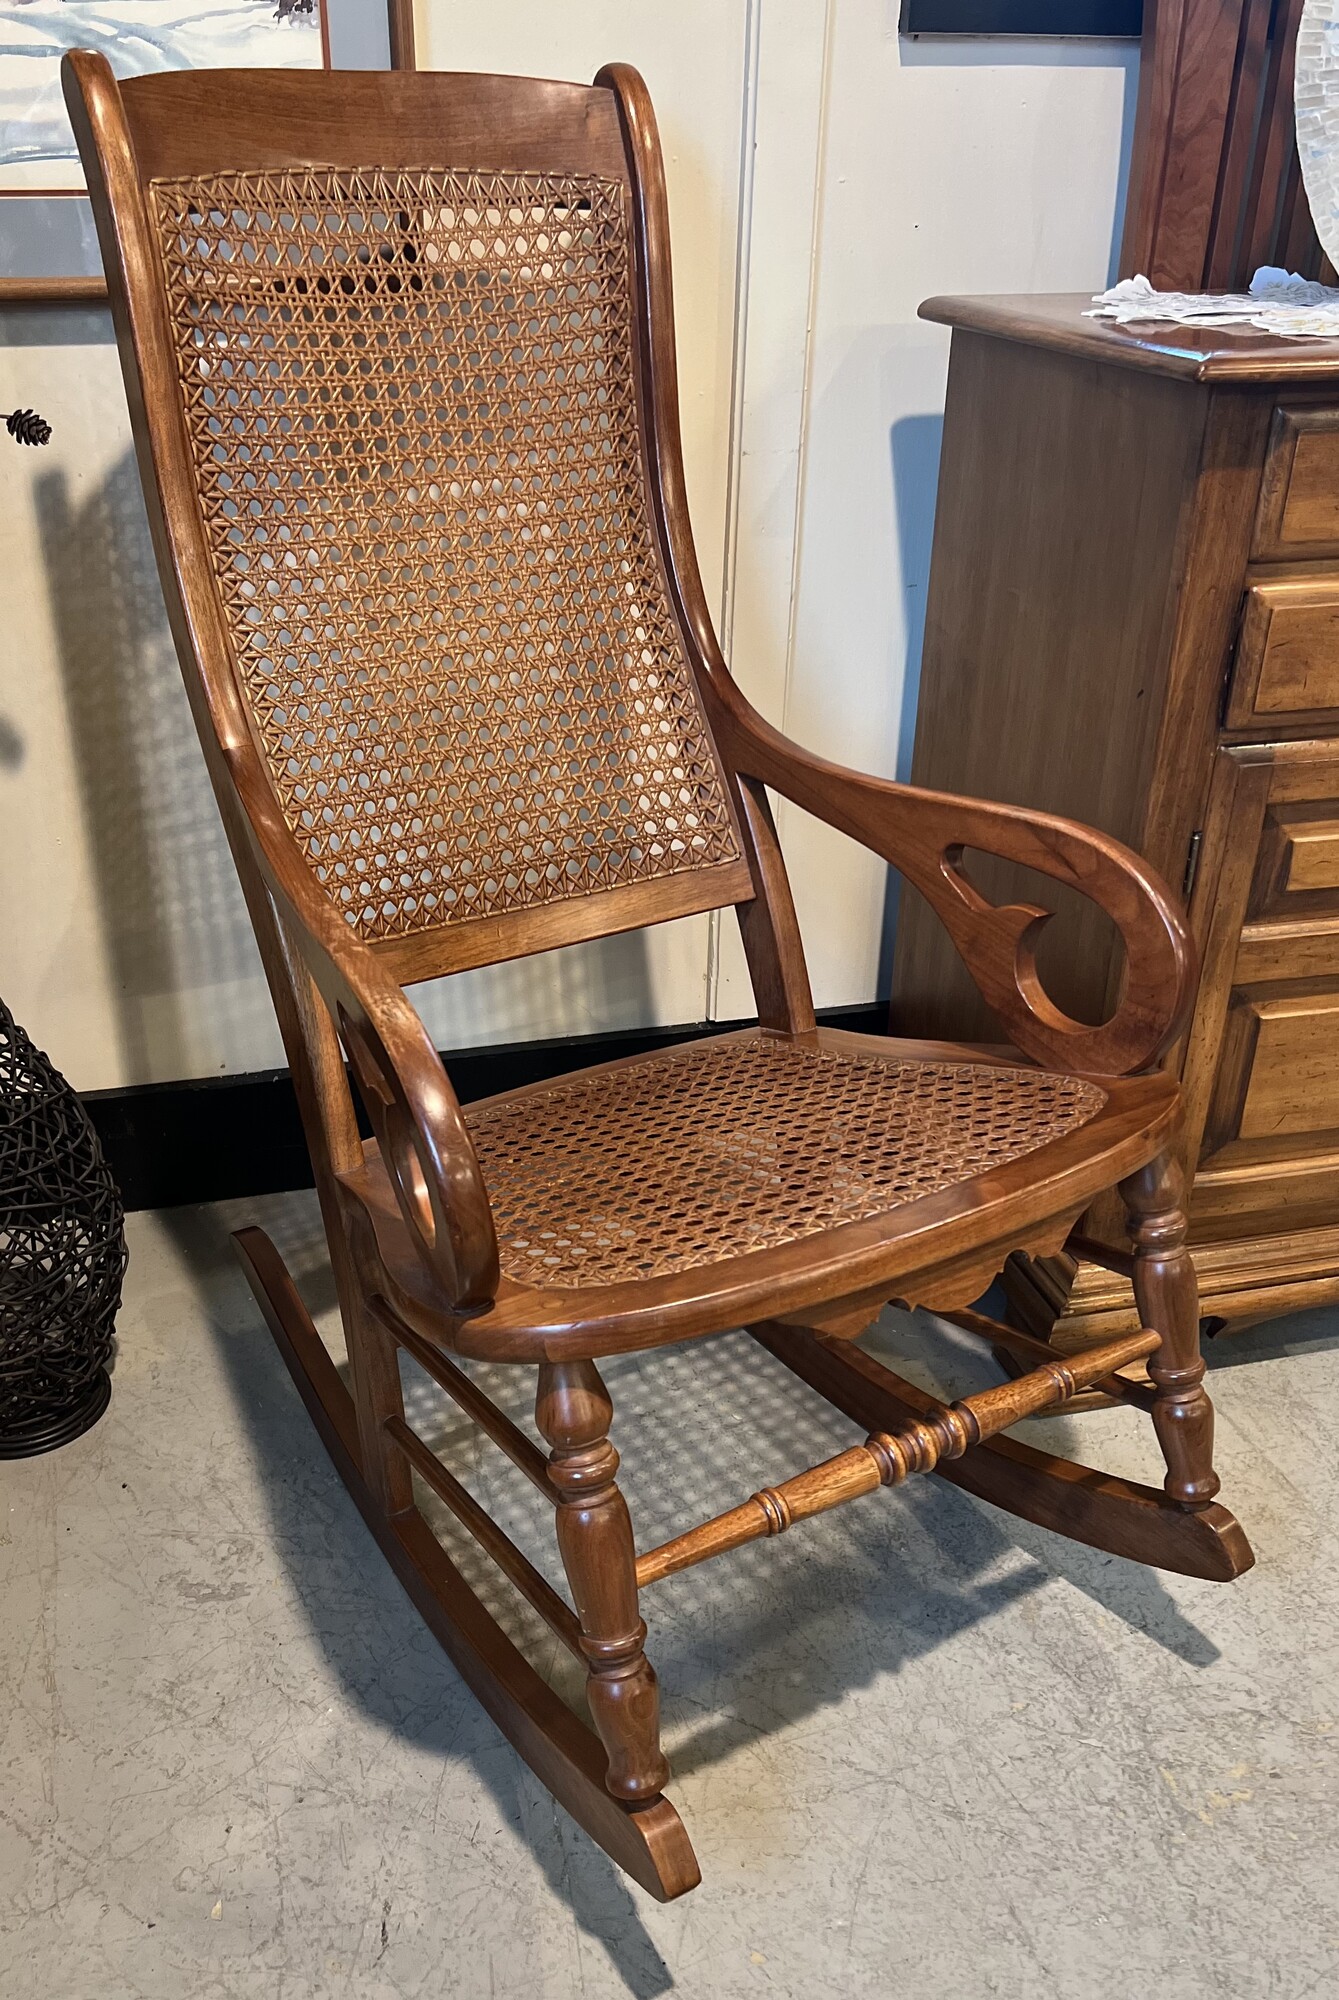 Amana cain wood rocker.

Beautifully carved medium wood Amana rocker chair with a wicker cain seat and and back rest.

Comes with Amana furntiure polish.

There is minor wear on the wood.

41in tall x 22in wide x 32in deep x 18in tall (seat to floor)